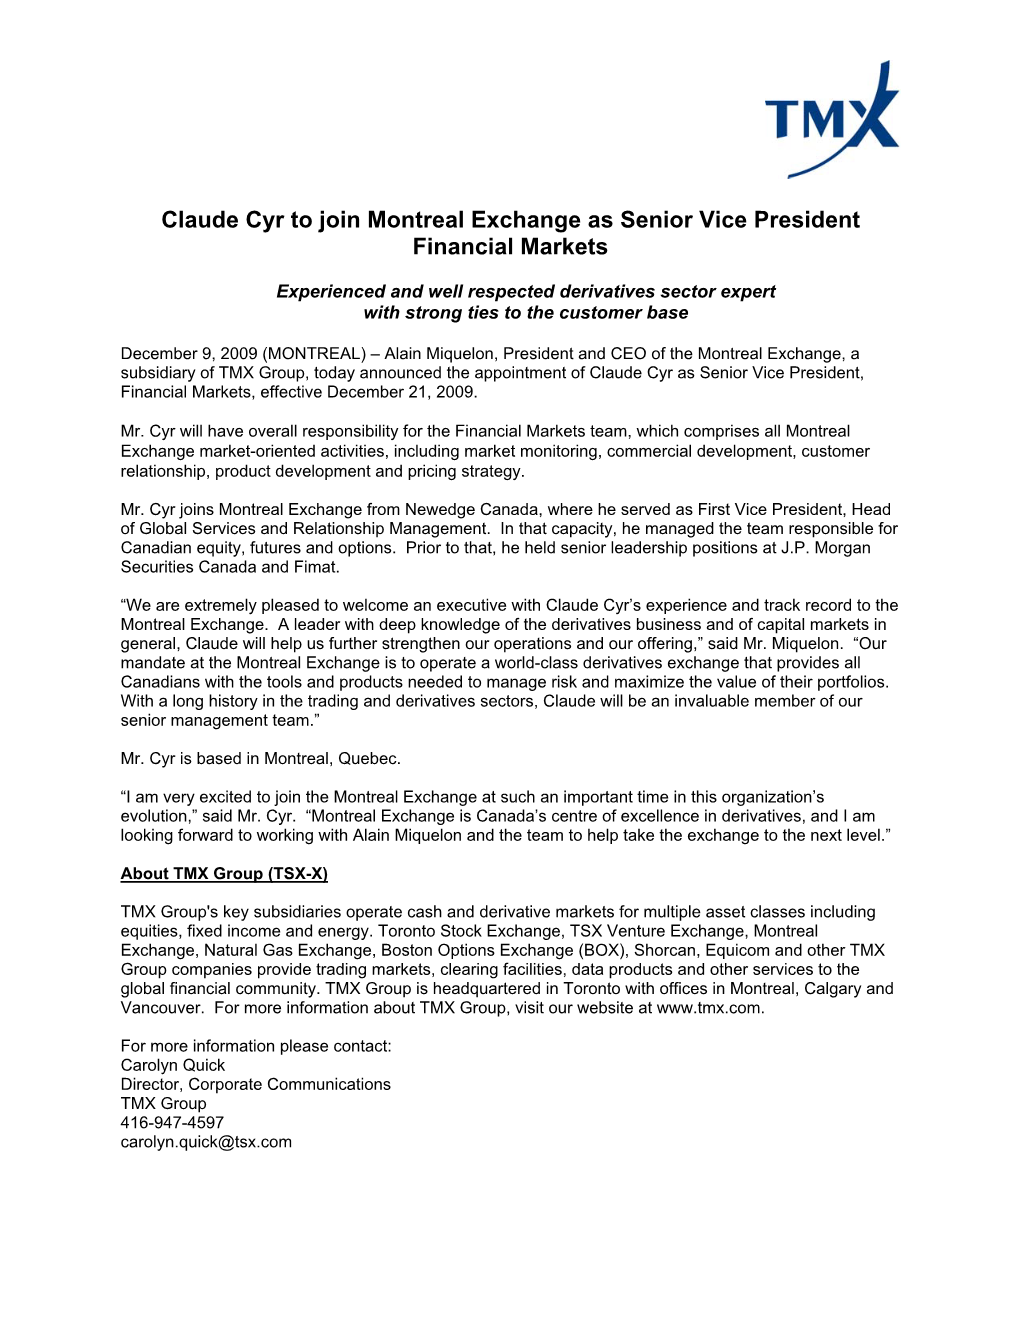 Claude Cyr to Join Montreal Exchange As Senior Vice President Financial Markets